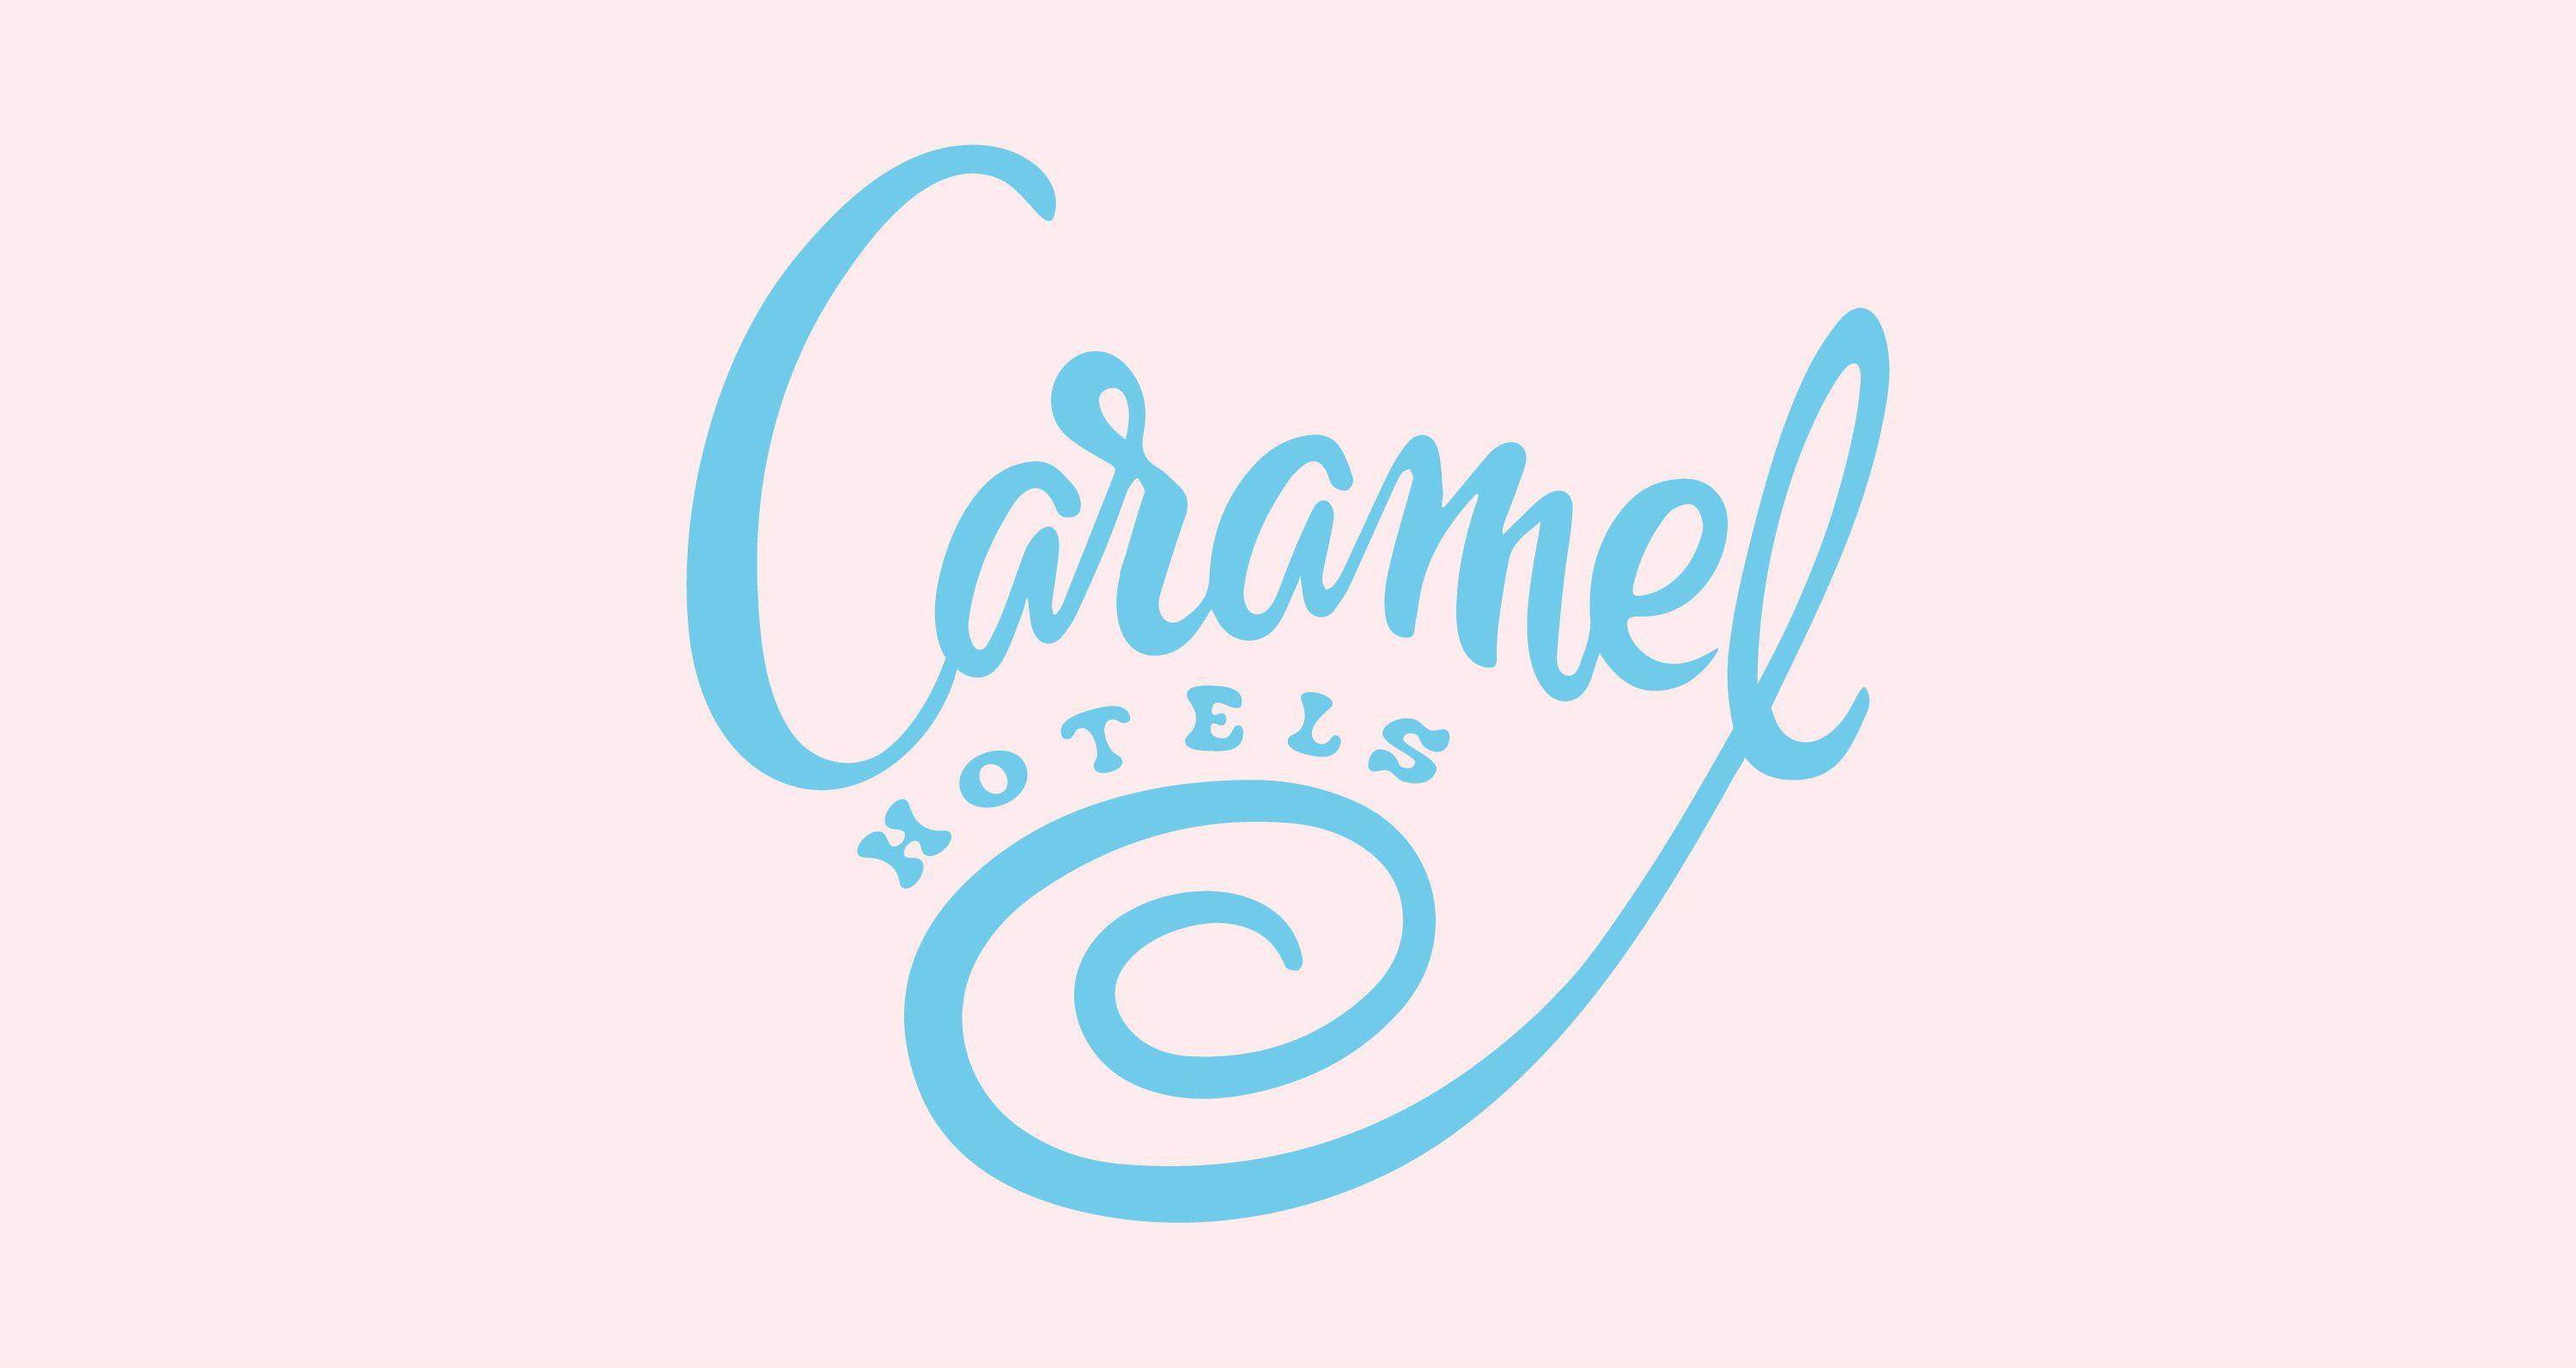 Caramel Logo - Caramel Hotels. Hotel Caramel business objective is to sell